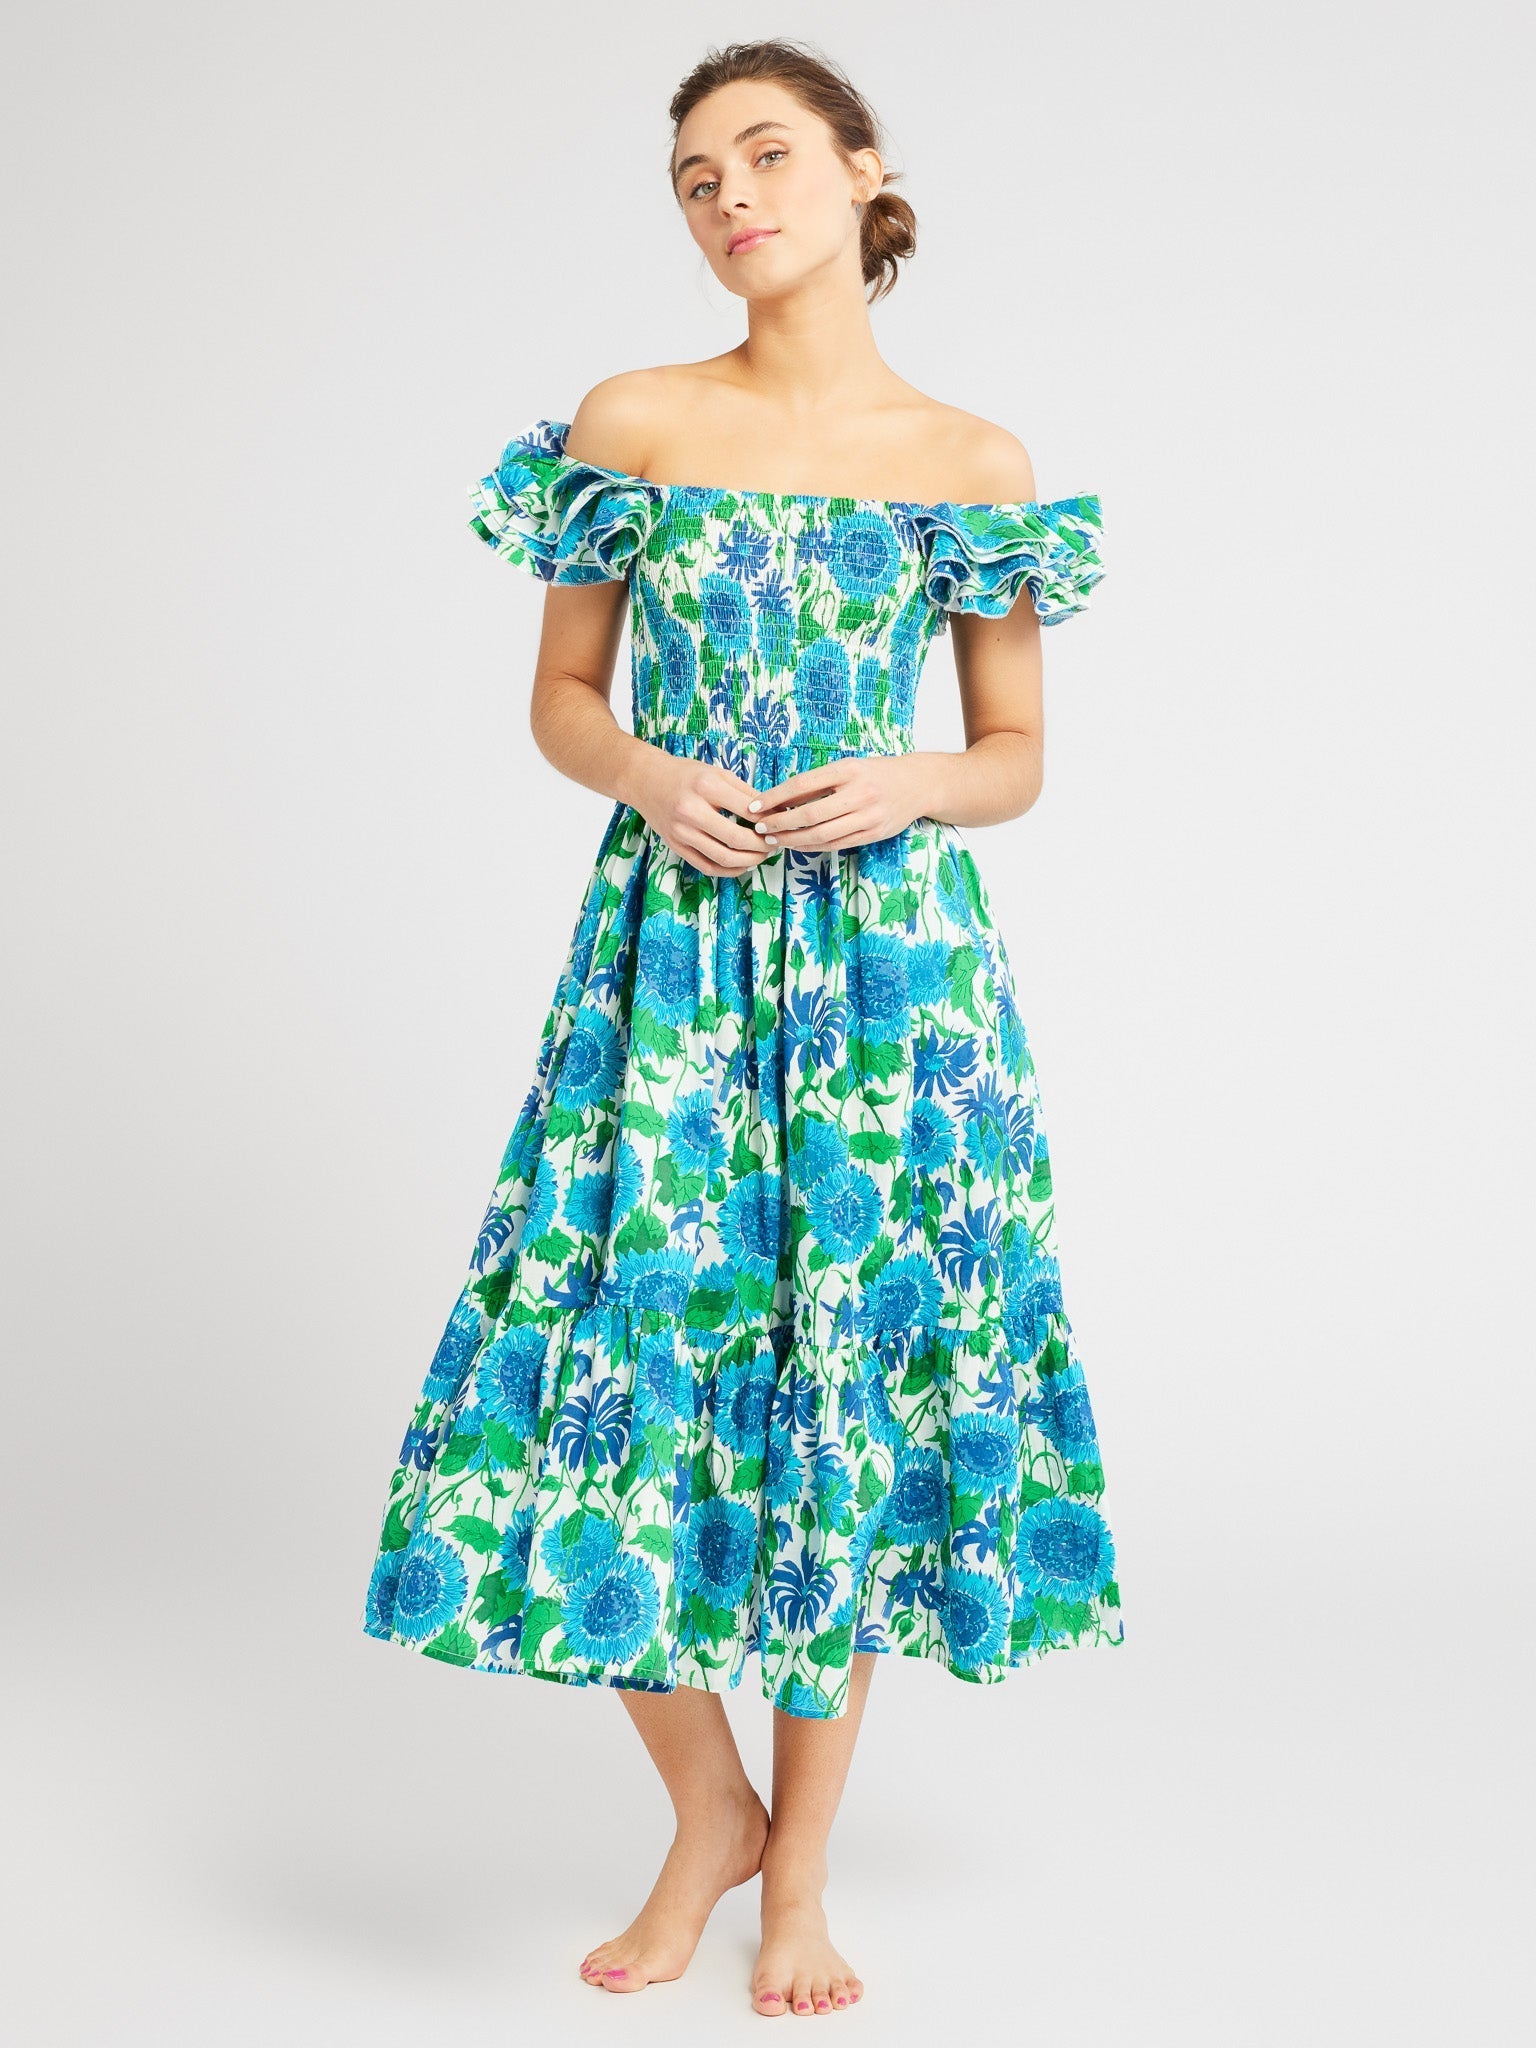 MILLE Clothing Olympia Dress in Cornflower